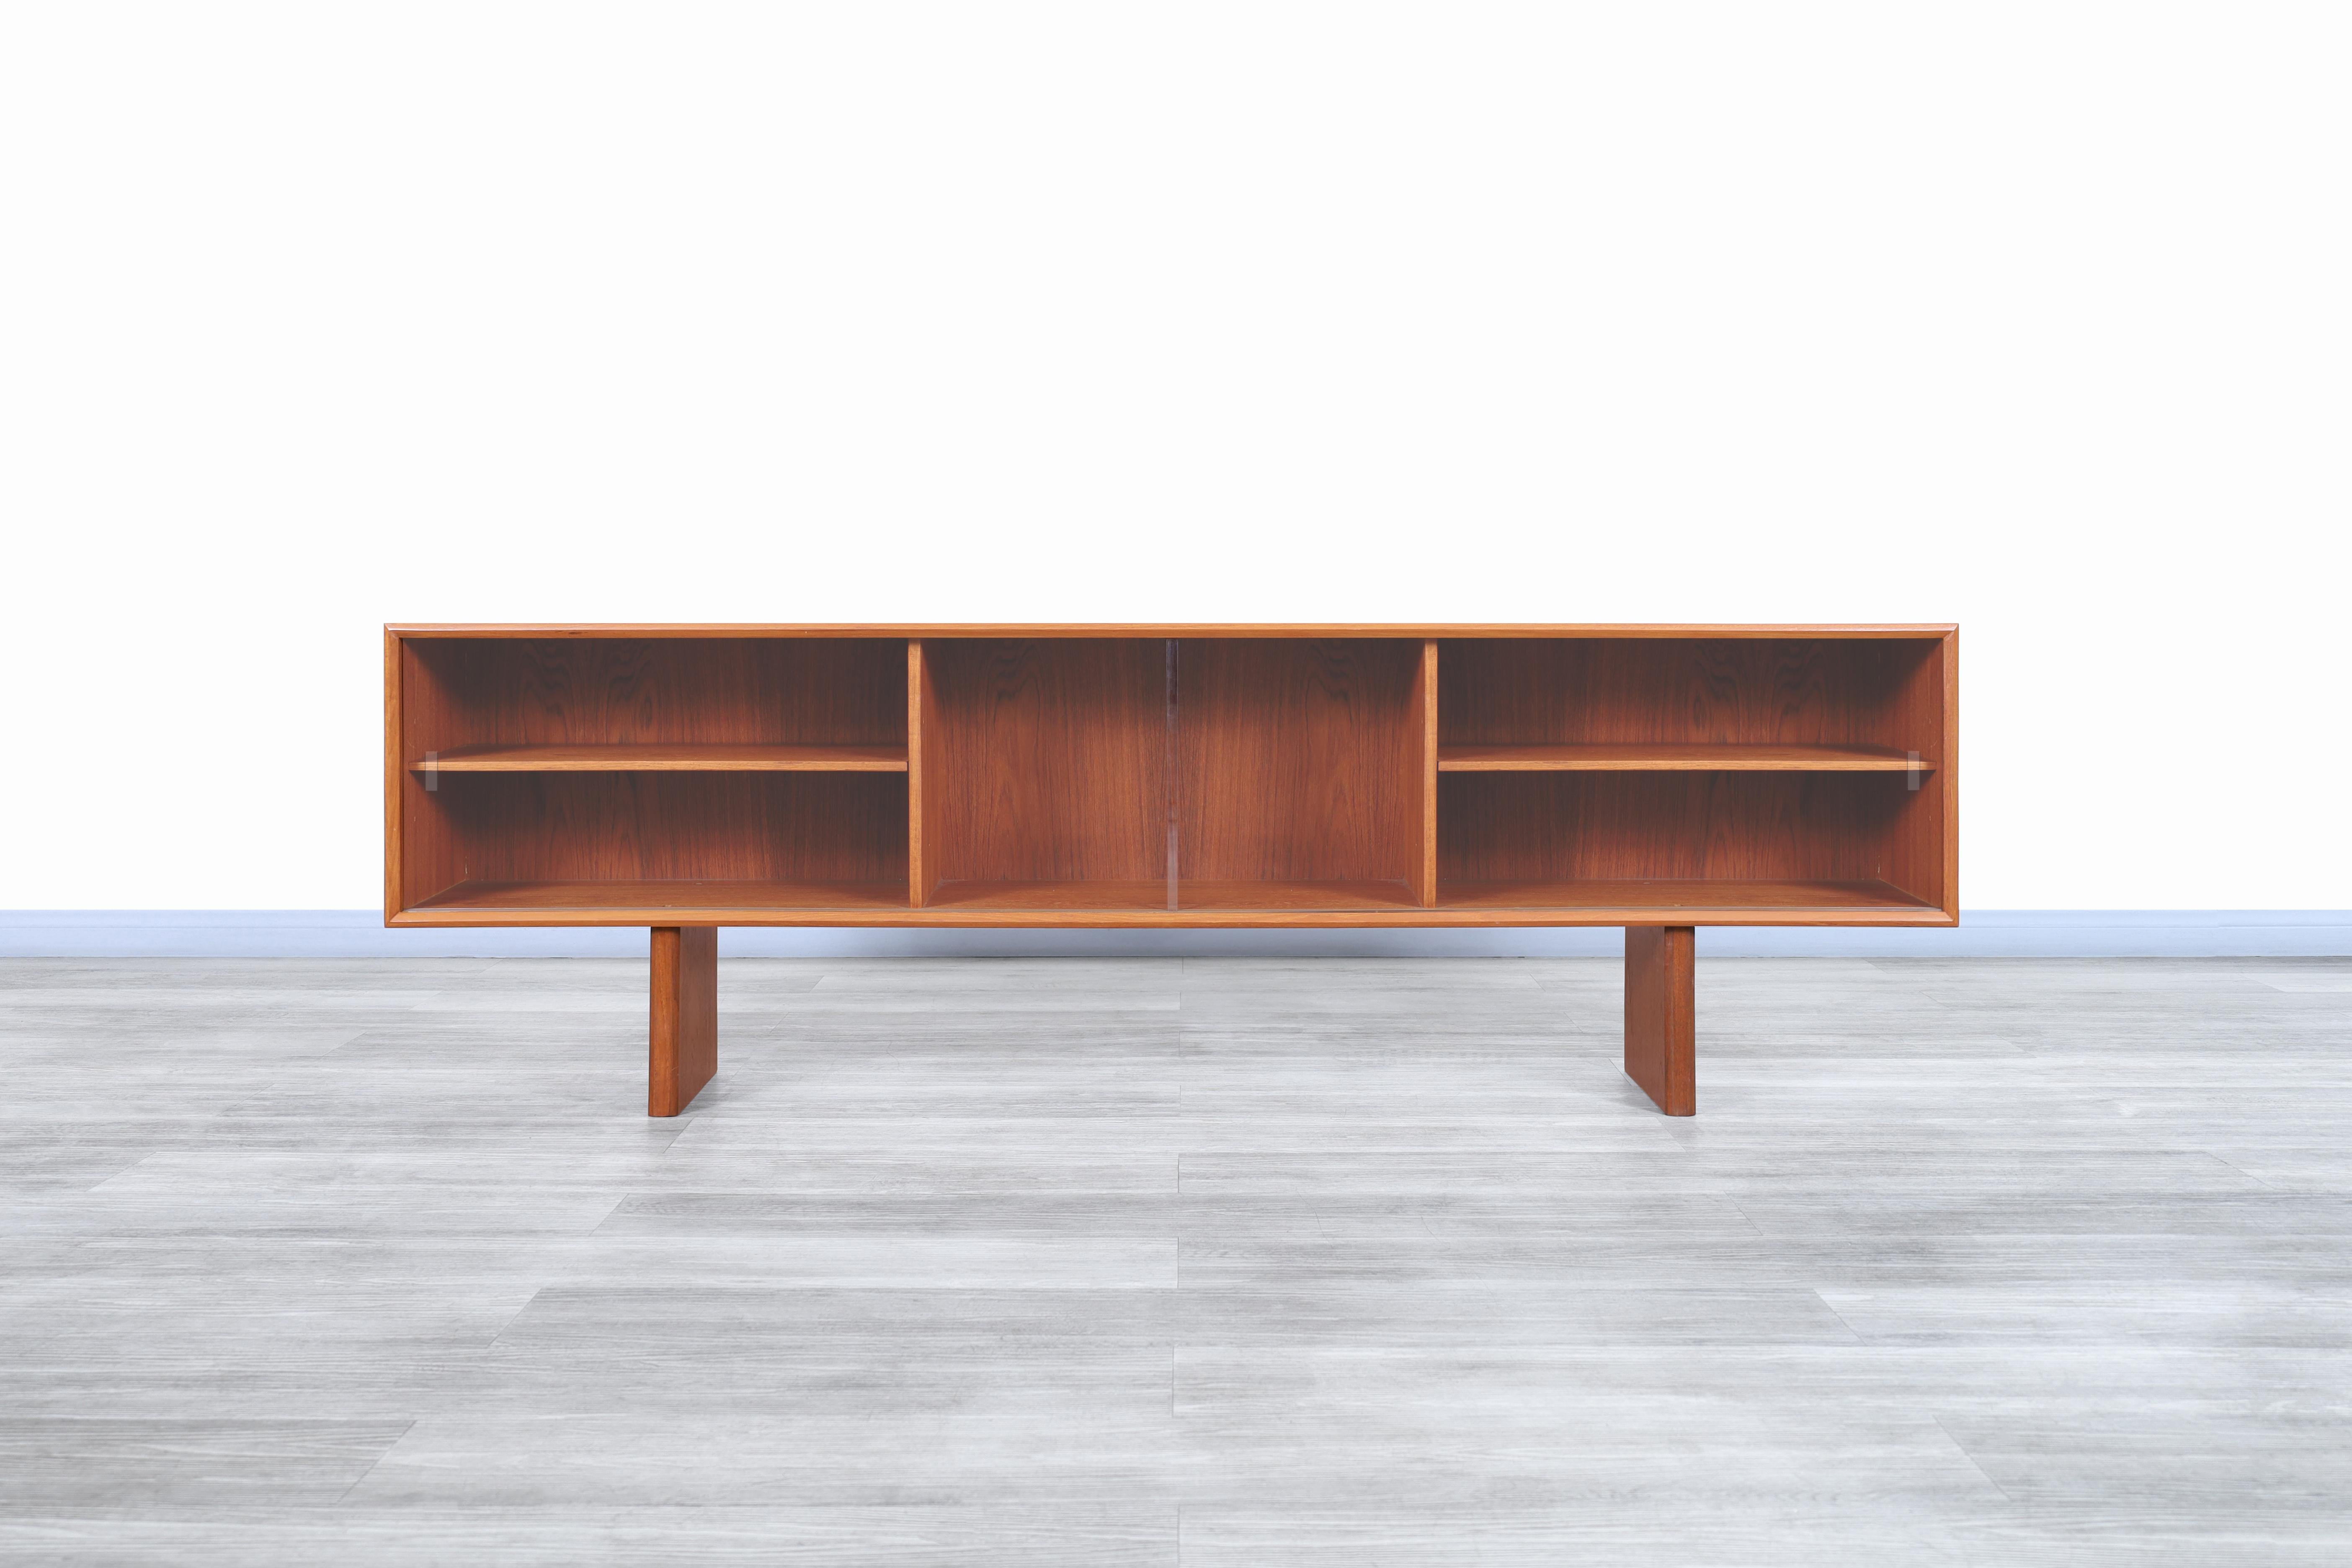 Wonderful Danish low profile teak bookcase / credenza manufactured by Faarup Møbelfabrik in Denmark, circa 1960s. This bookcase has a minimalist but highly functional design, where the teak wood stands out thanks to the grains of the wood that gives